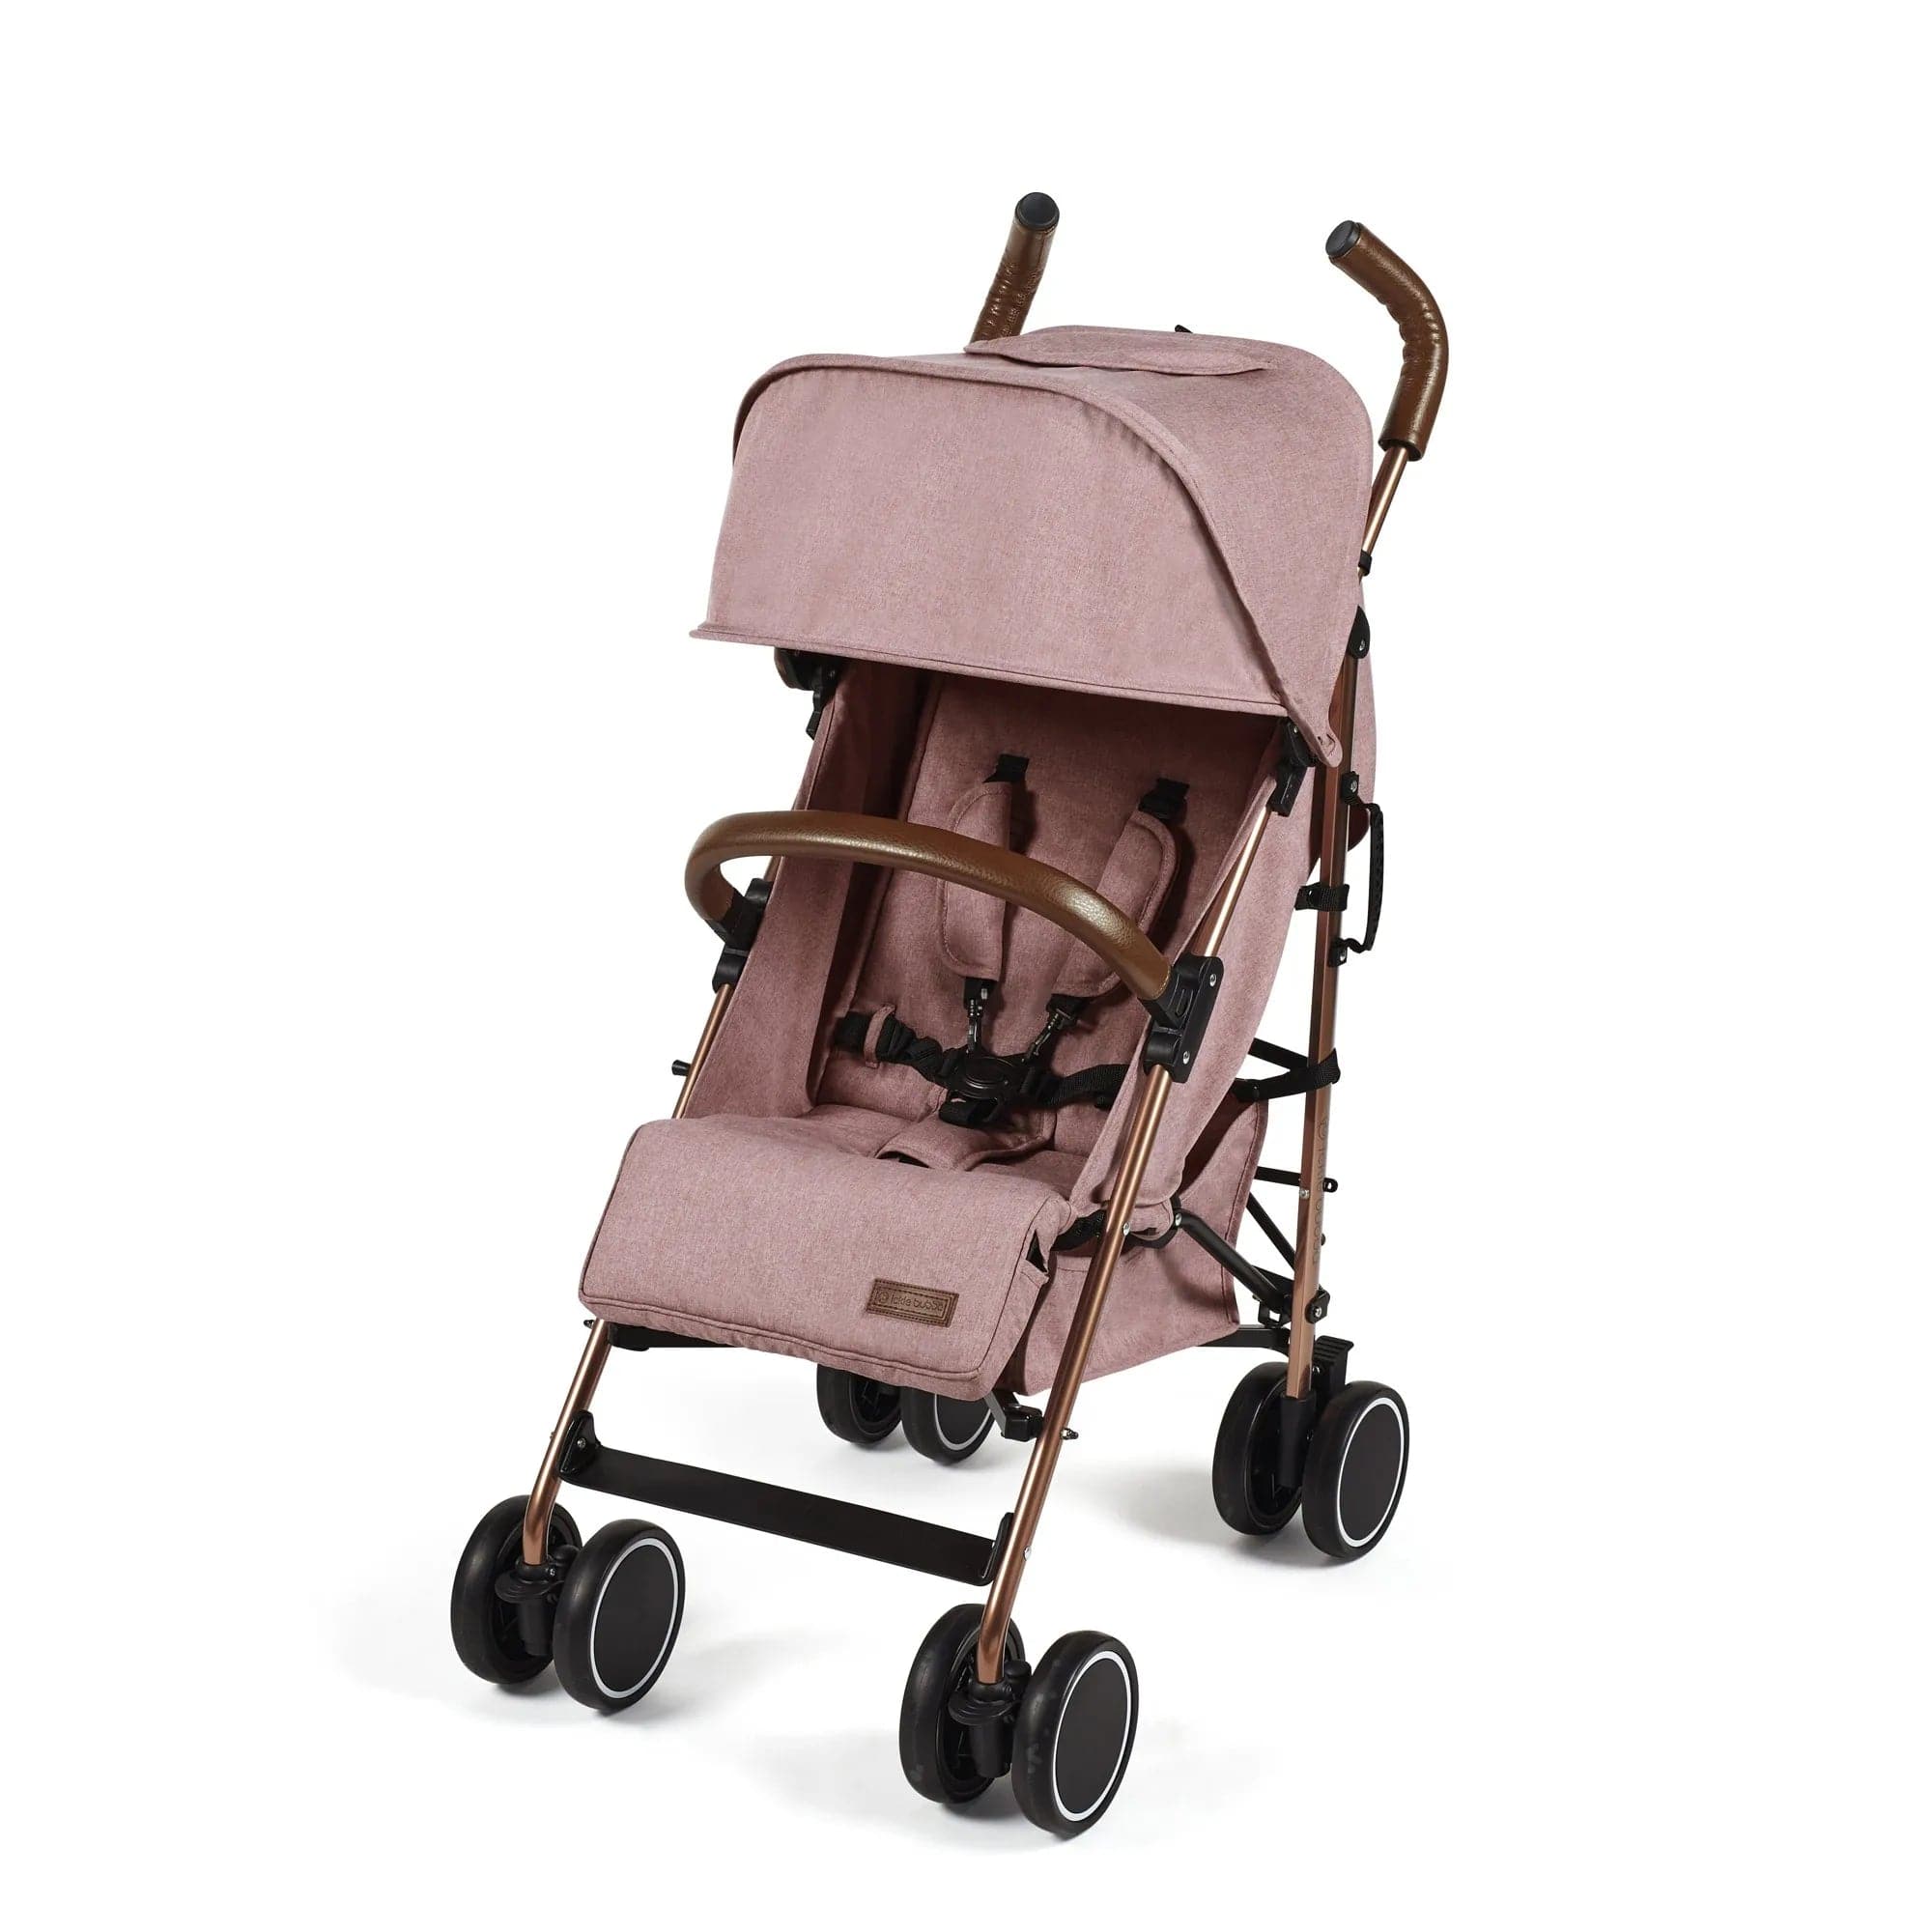 Ickle bubba Discovery Prime Stroller -  Rose Gold / Dusky Pink - For Your Little One